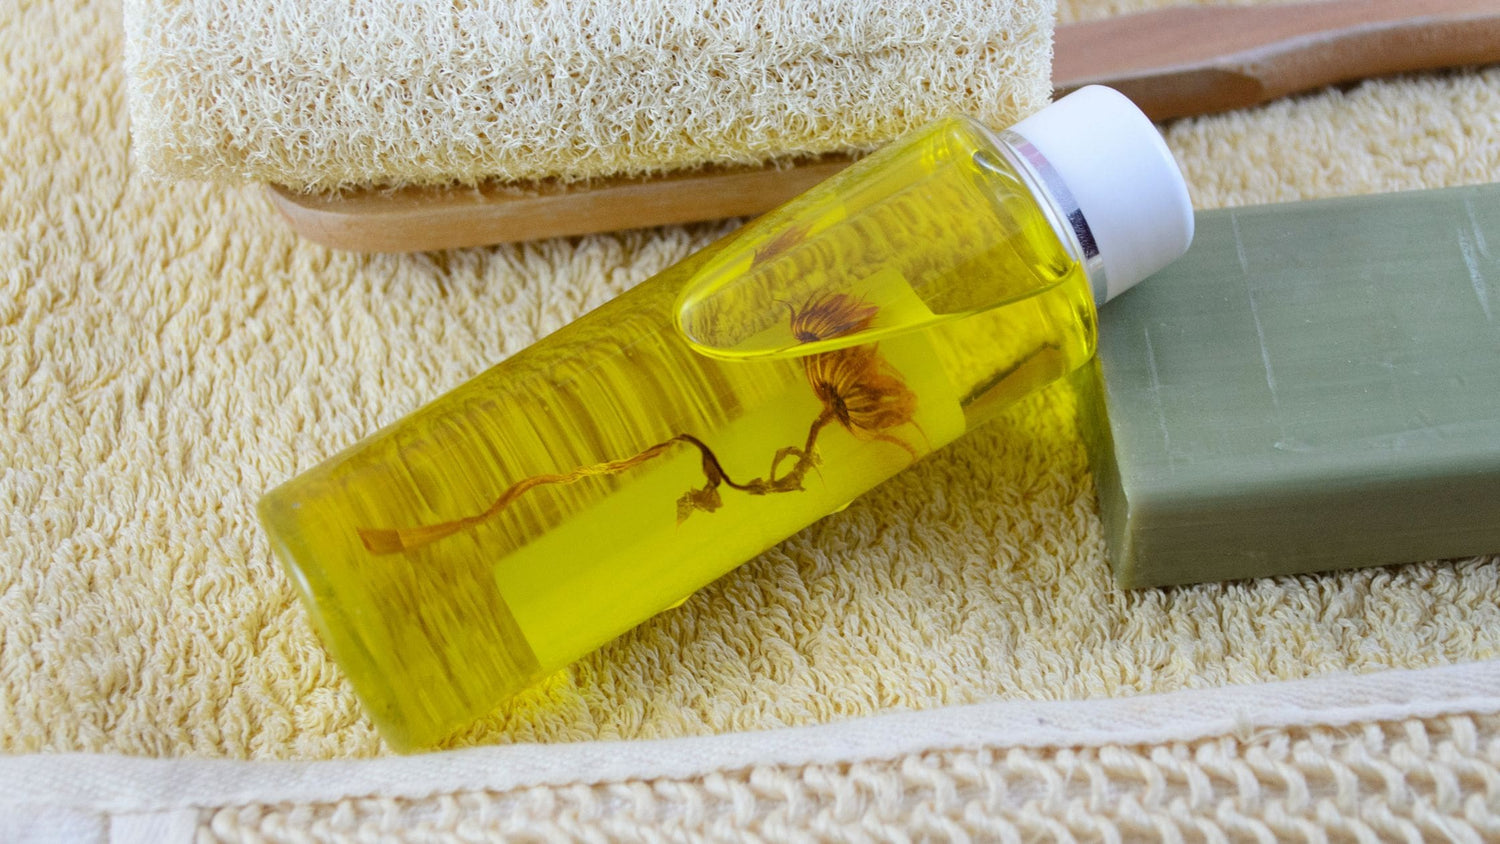 How To Use a Body Oil: 11 Ideas For Your Beauty & Spa Routine